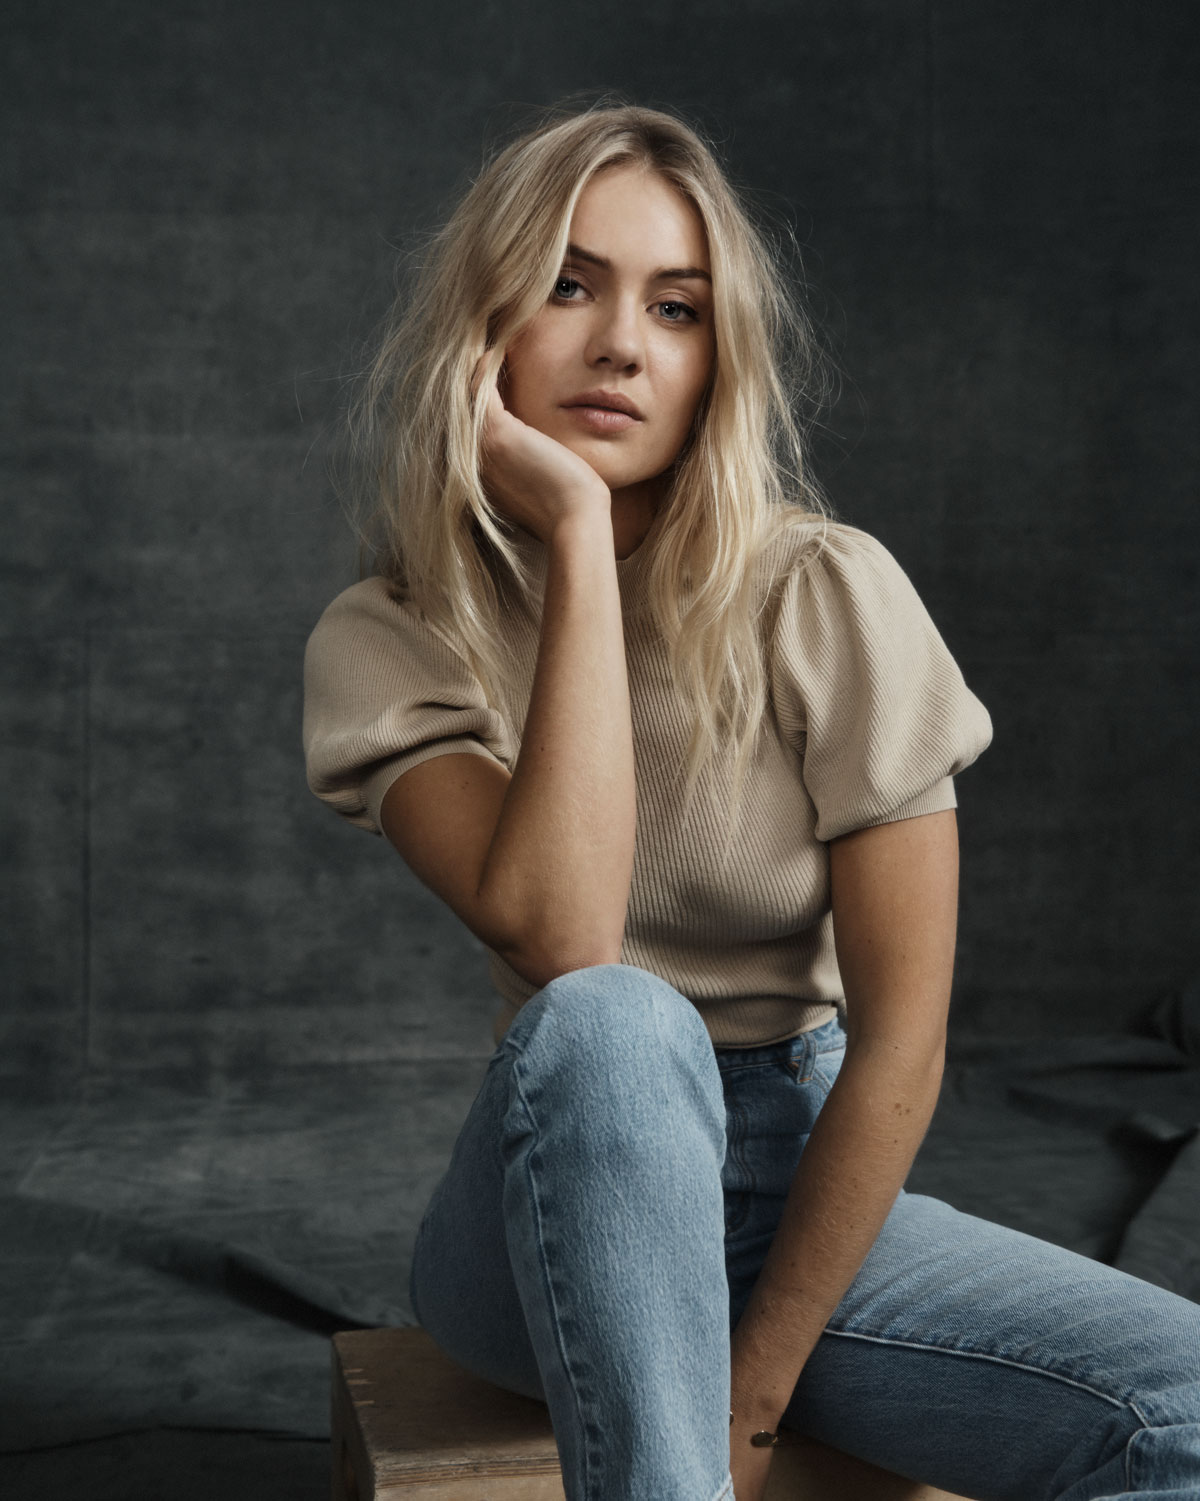 Myer ambassador and model Elyse Knowles.